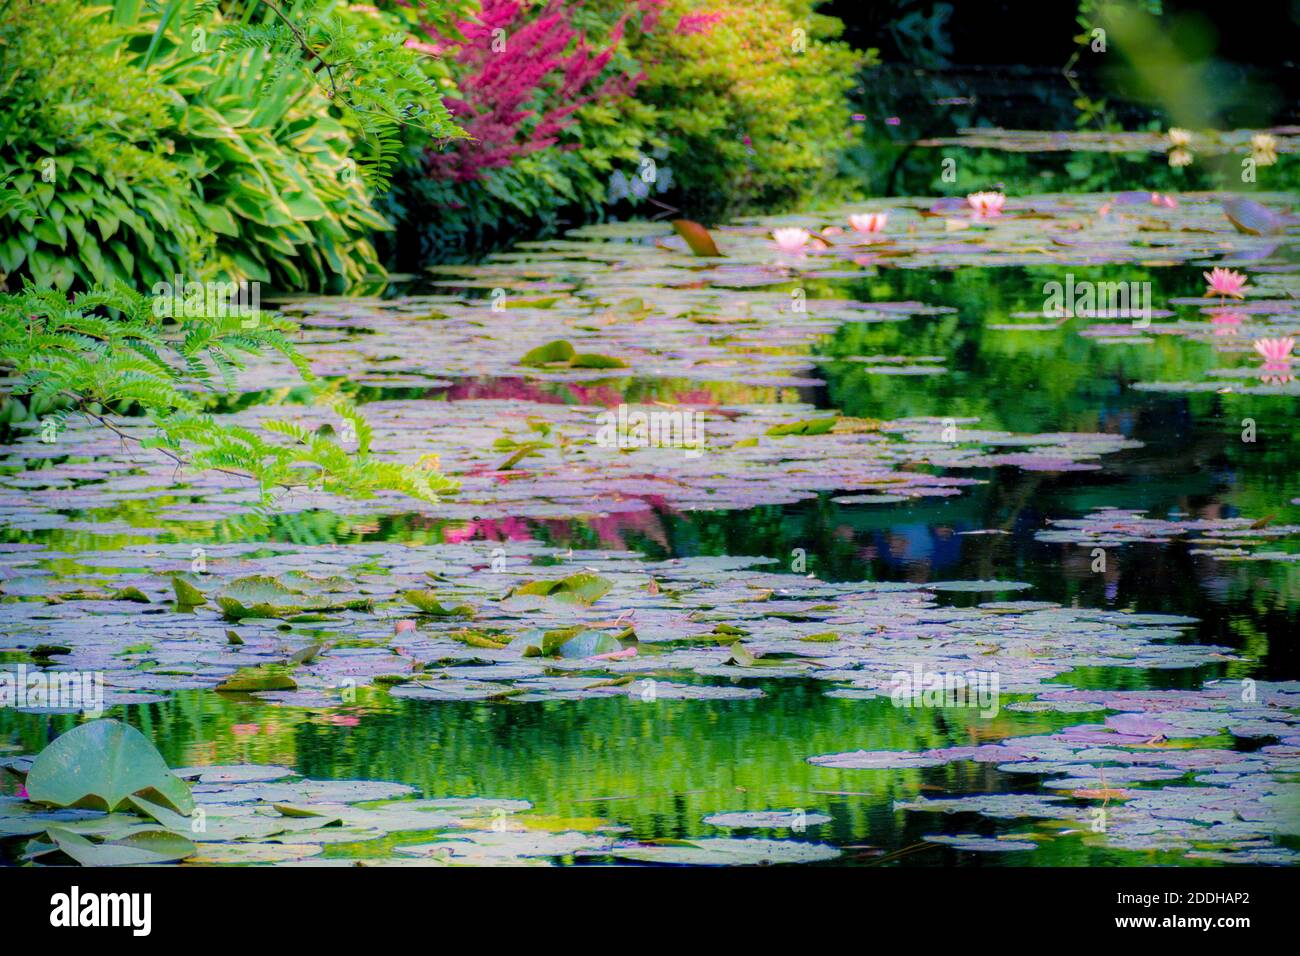 Les Jardins de Monet à Giverny - Monet's Garden - House and water lily gardens of French artist Claude Monet in Giverny, France Stock Photo